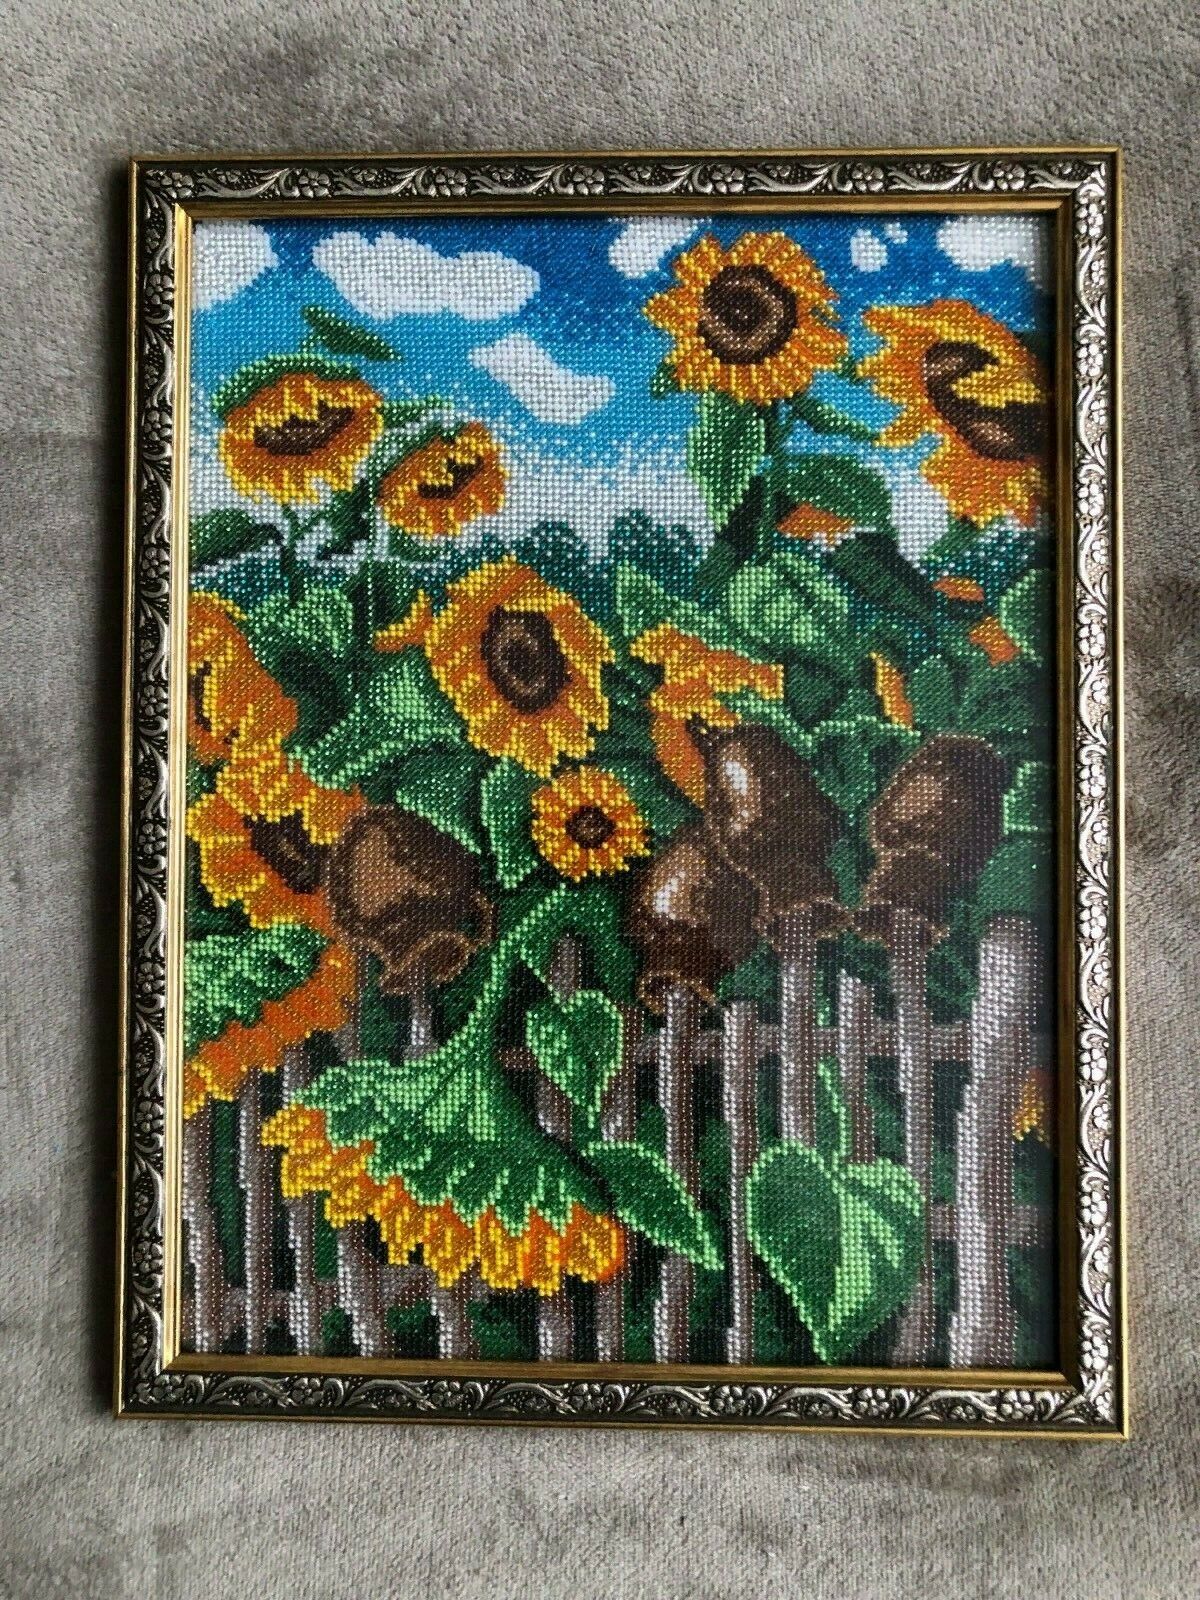 The picture is embroidered with beads